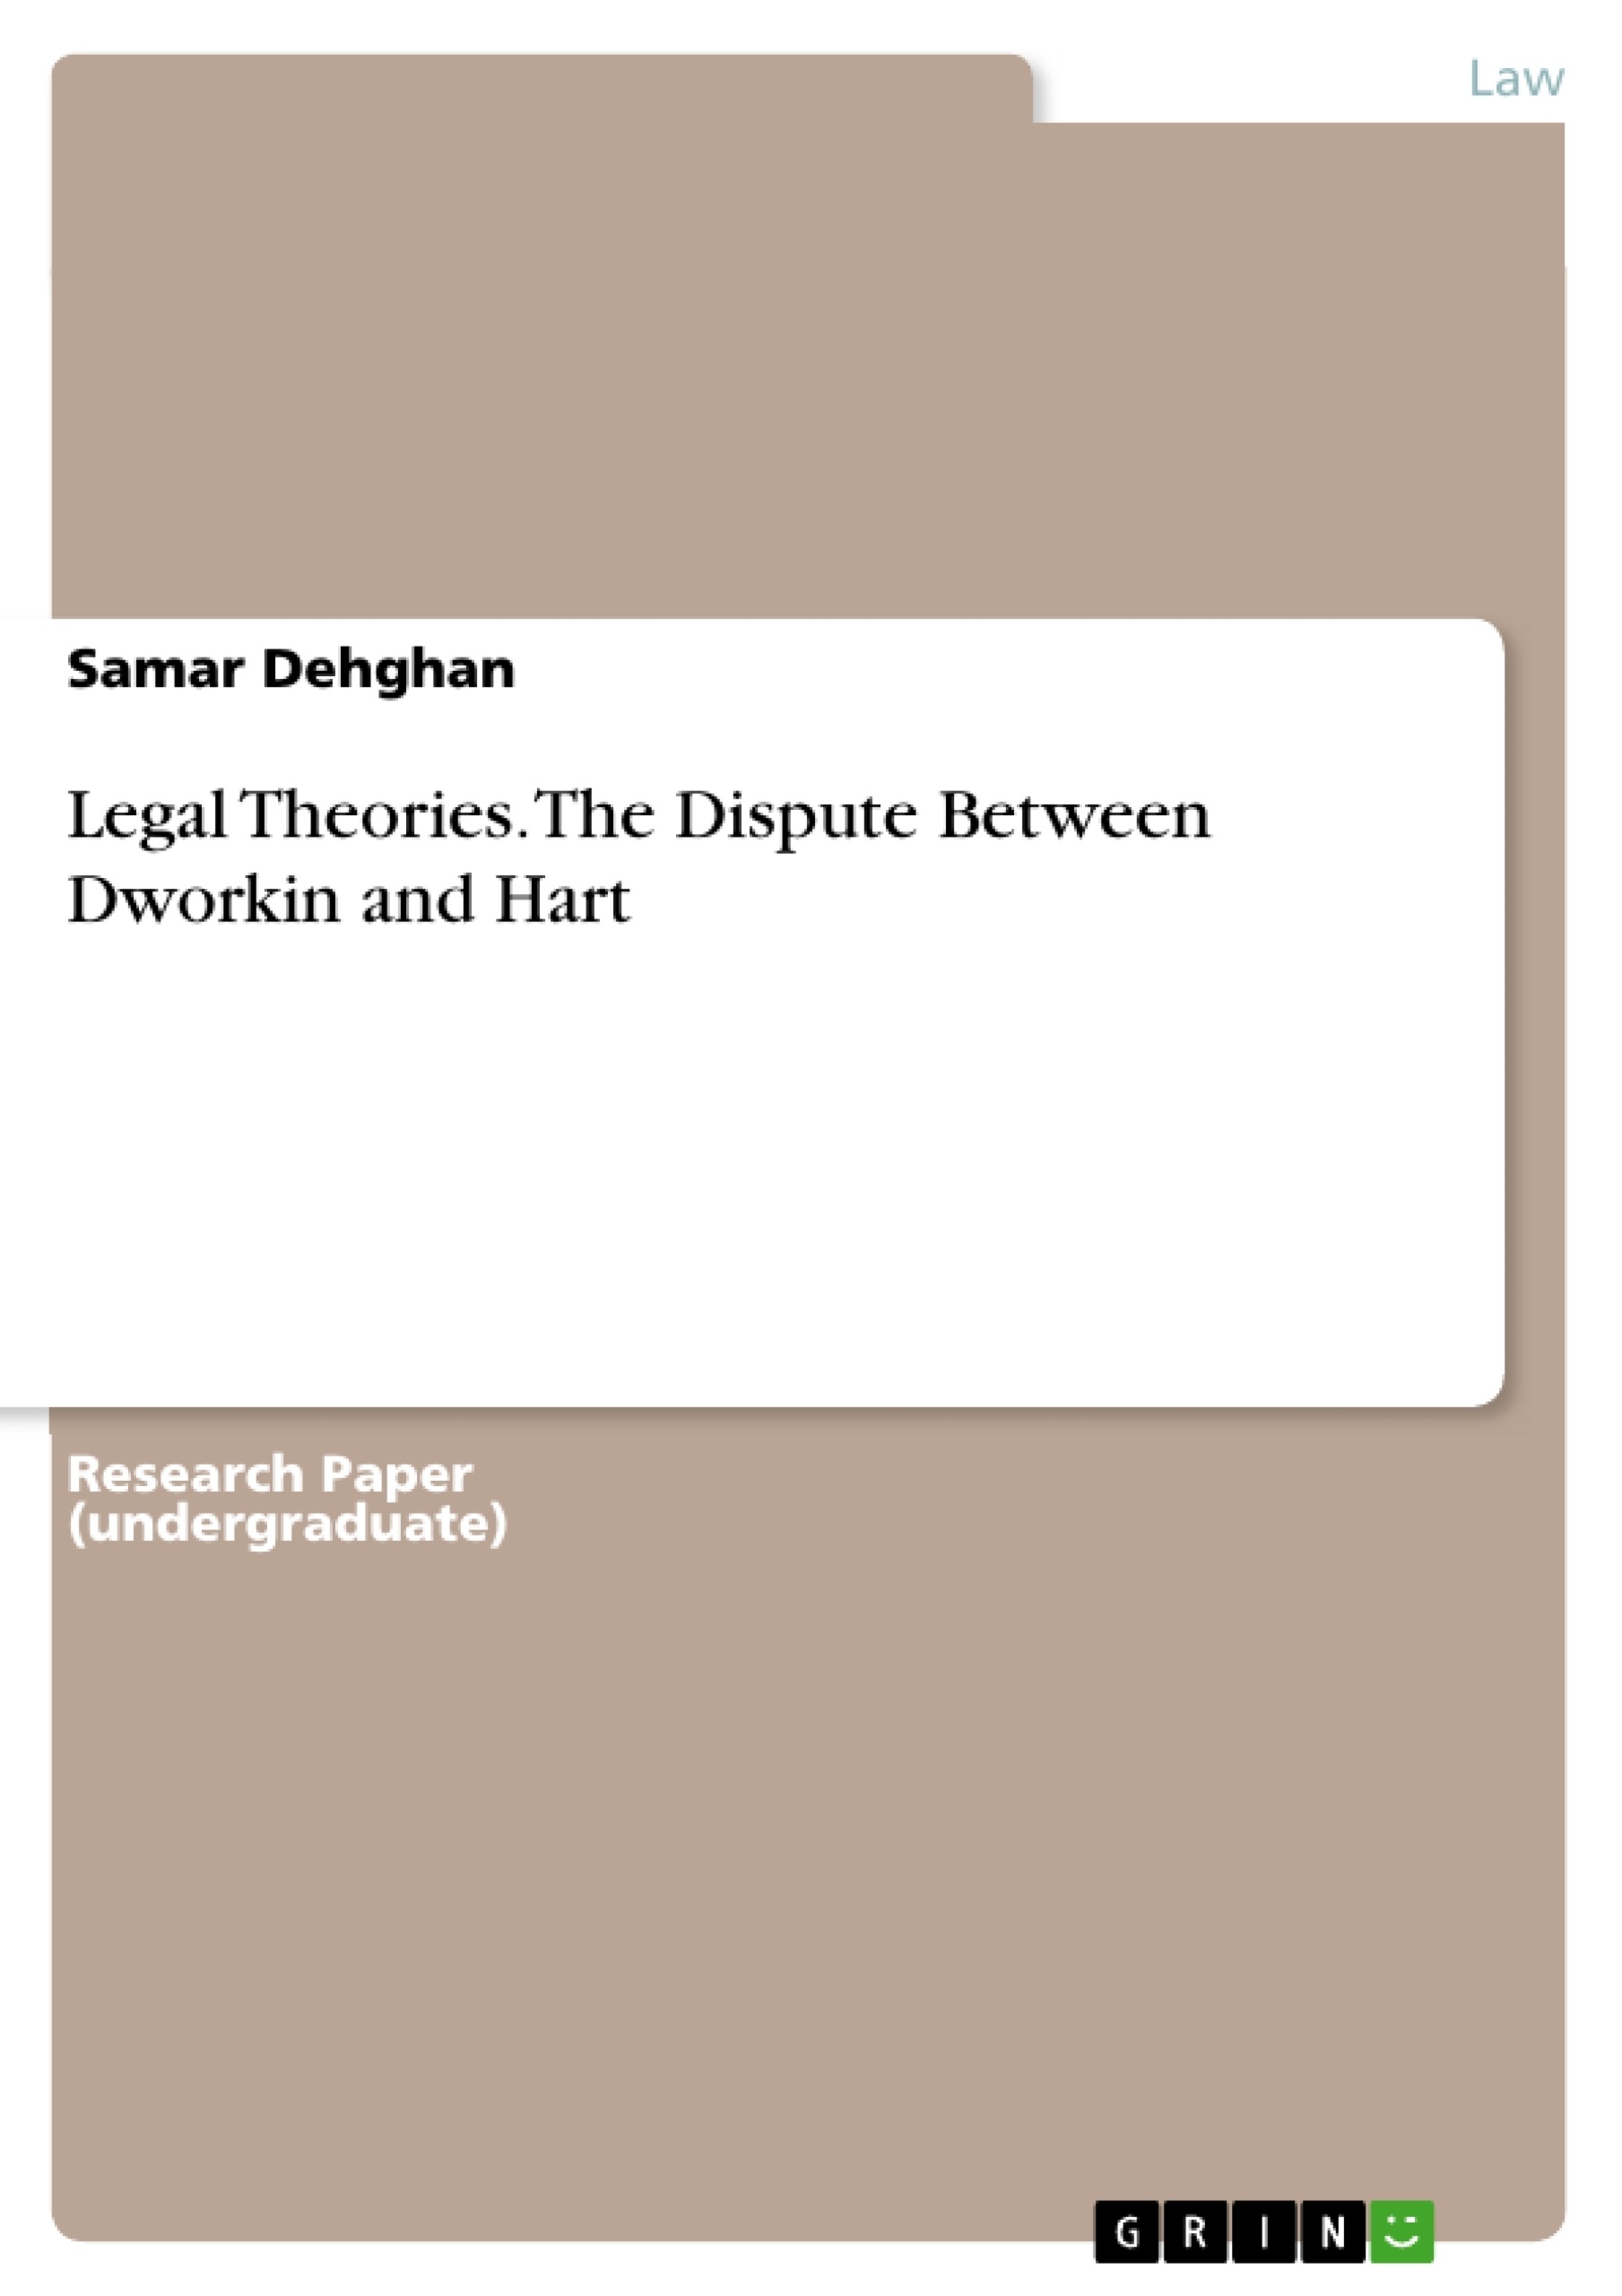 Title: Legal Theories. The Dispute Between Dworkin and Hart